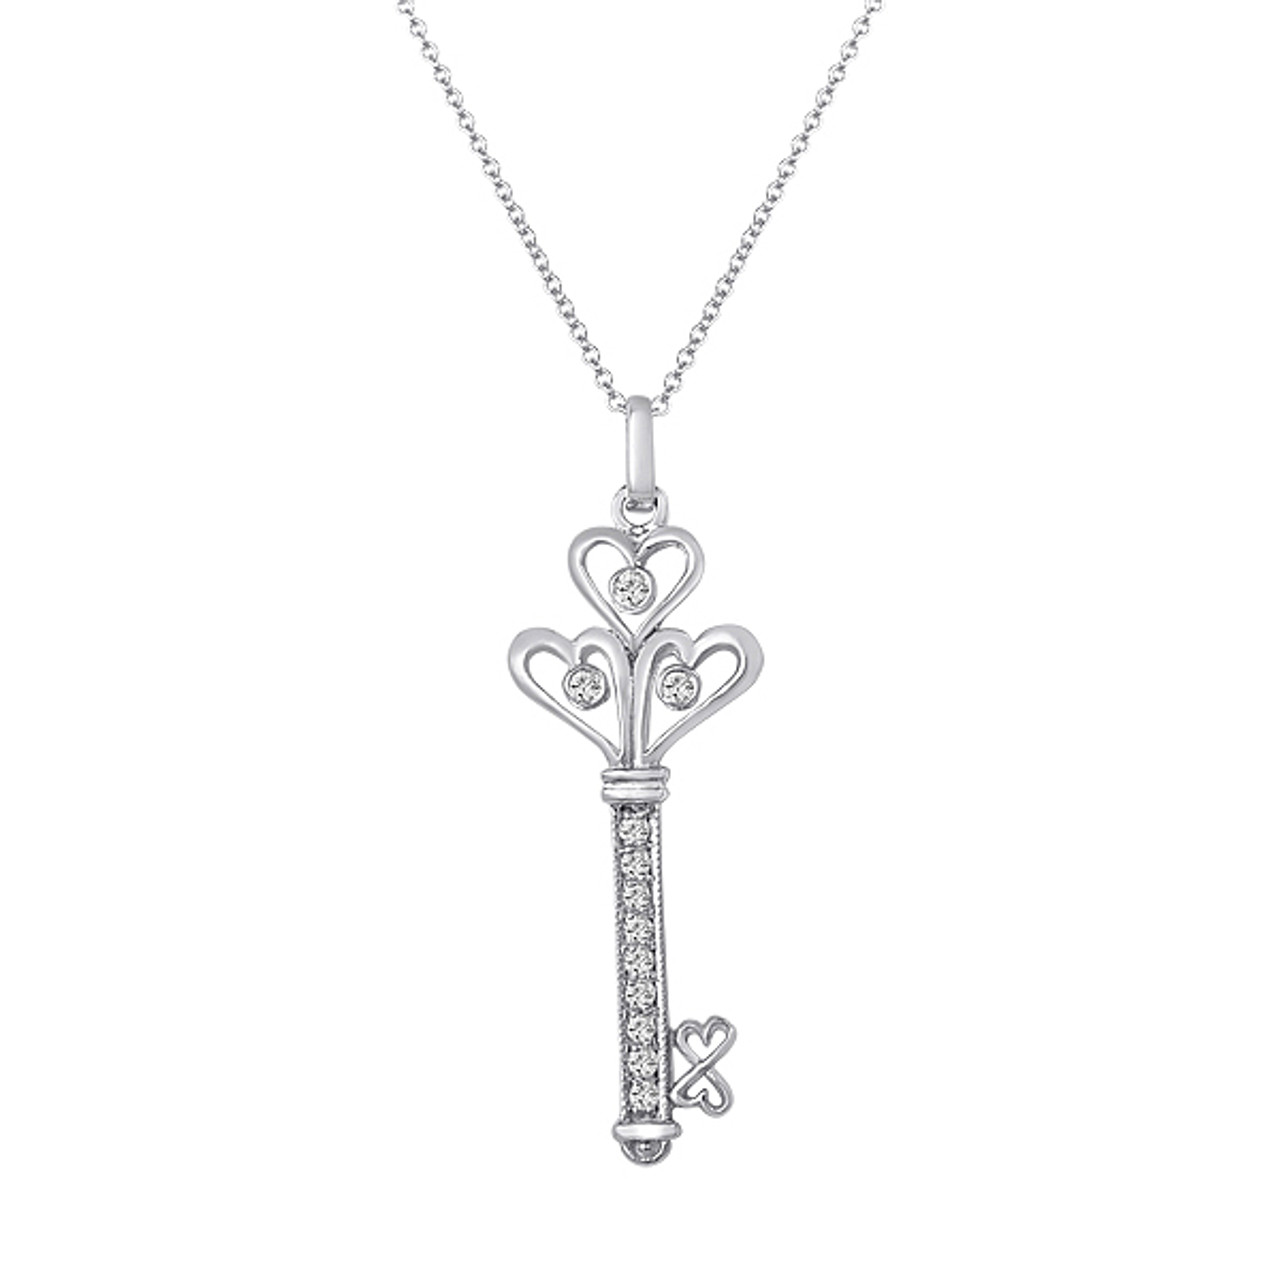 Key To Your Heart Diamond Love Pendant Necklace 14K White Gold 0.25 ct ...